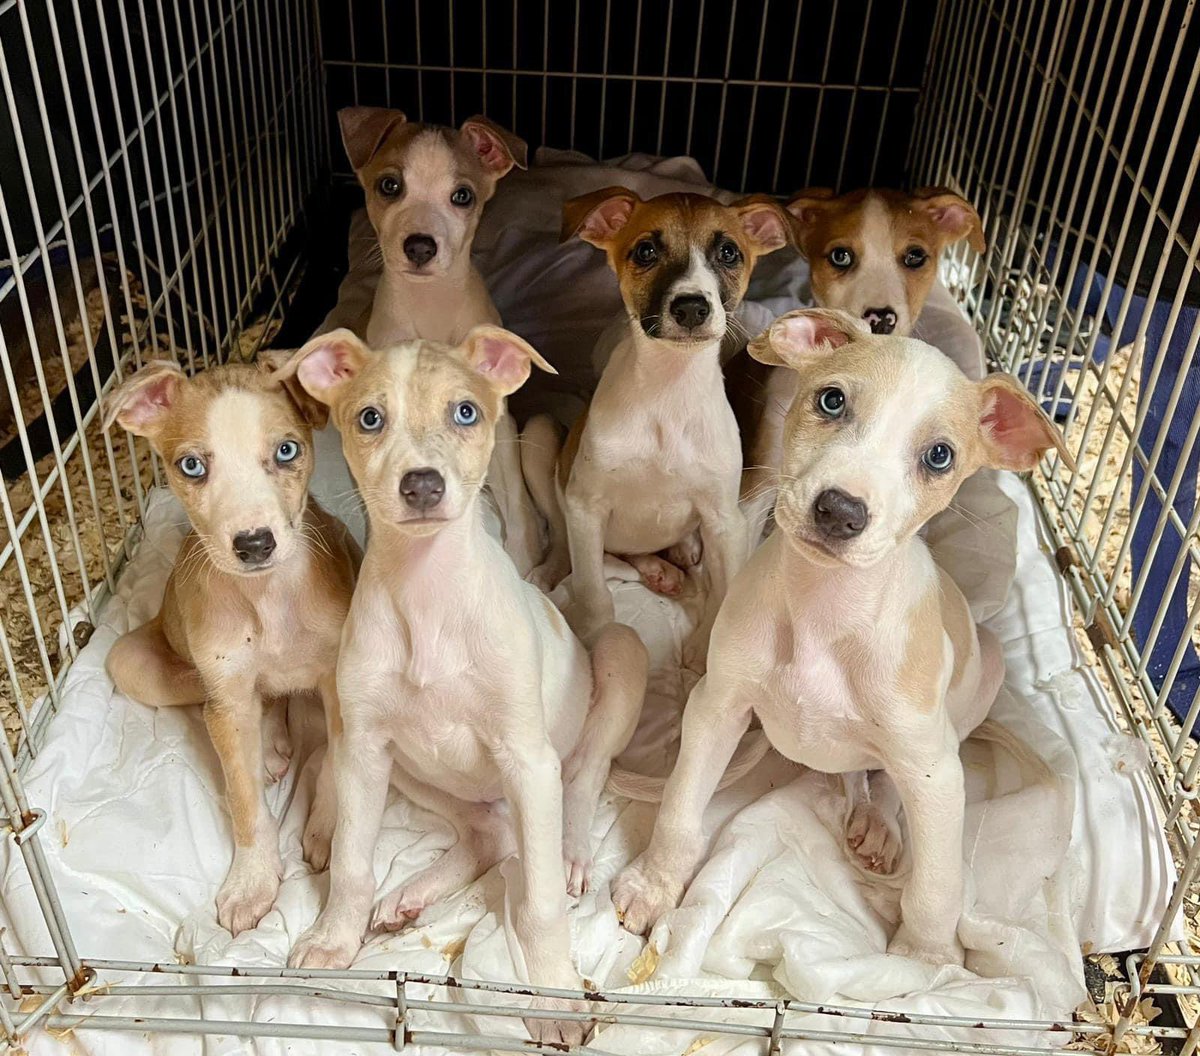 PUPPIES 💖💖💖🌟🌟🌟 6 of our 8 little guys who came into our care last week…they are seriously adorable and so cute…PUPPY LOVE 💖💖 Please donate towards these little guys, wormers, vaccinations, food, chips and general over the top 5 star care that they totally deserve…